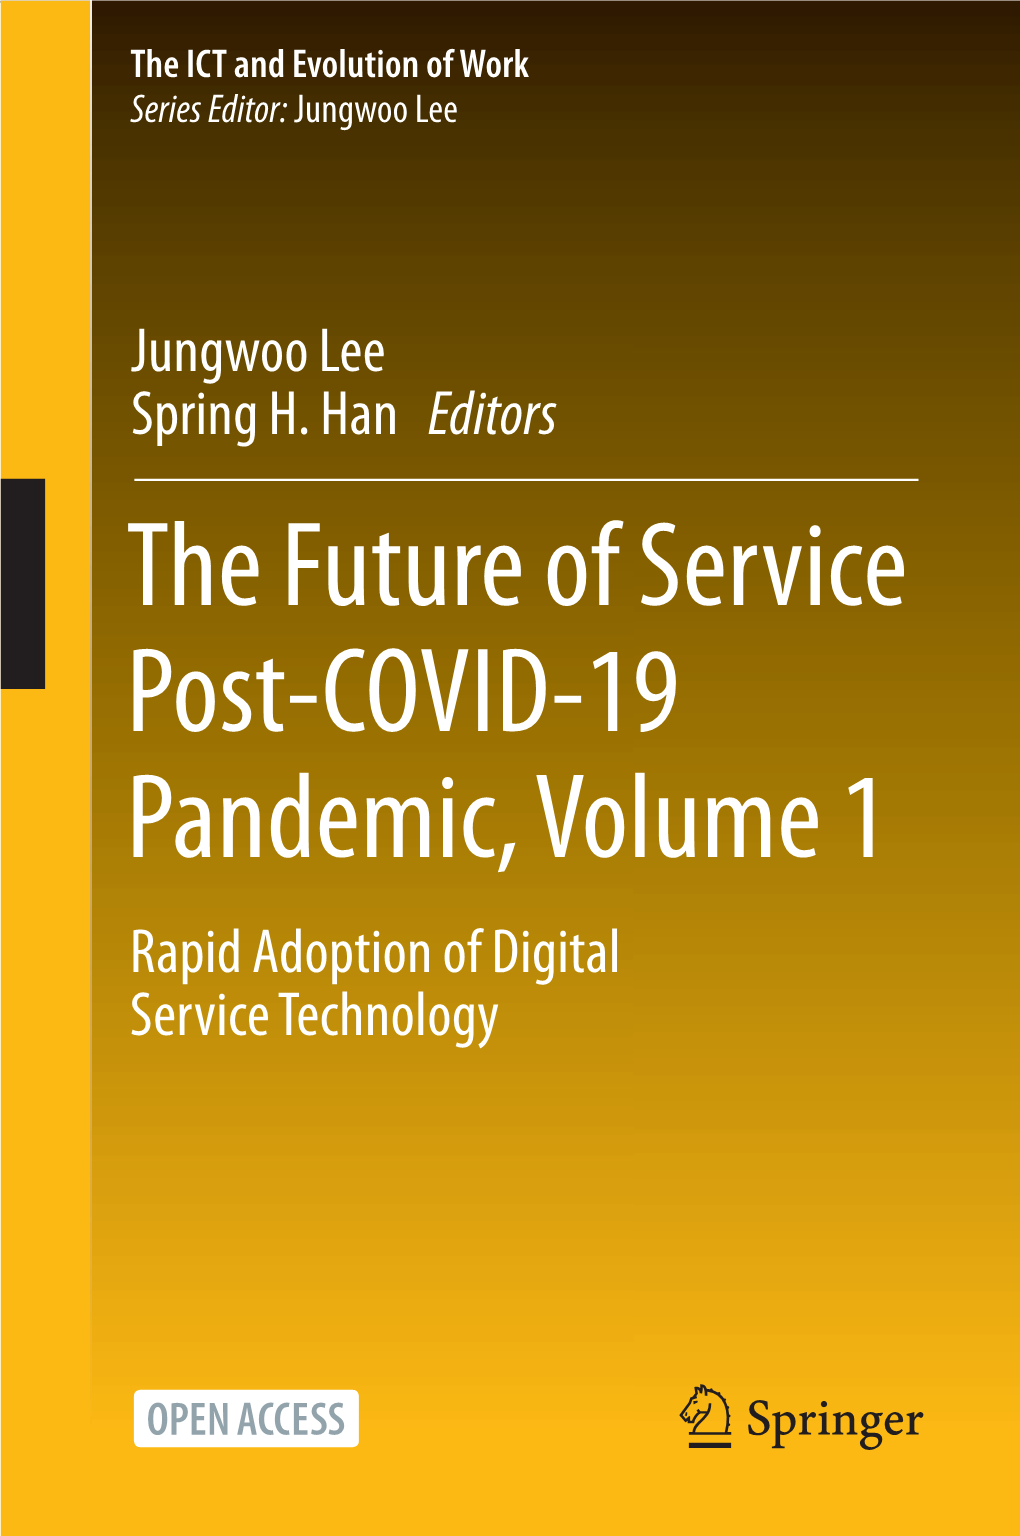 The Future of Service Post-COVID-19 Pandemic, Volume 1 Rapid Adoption of Digital Service Technology the ICT and Evolution of Work